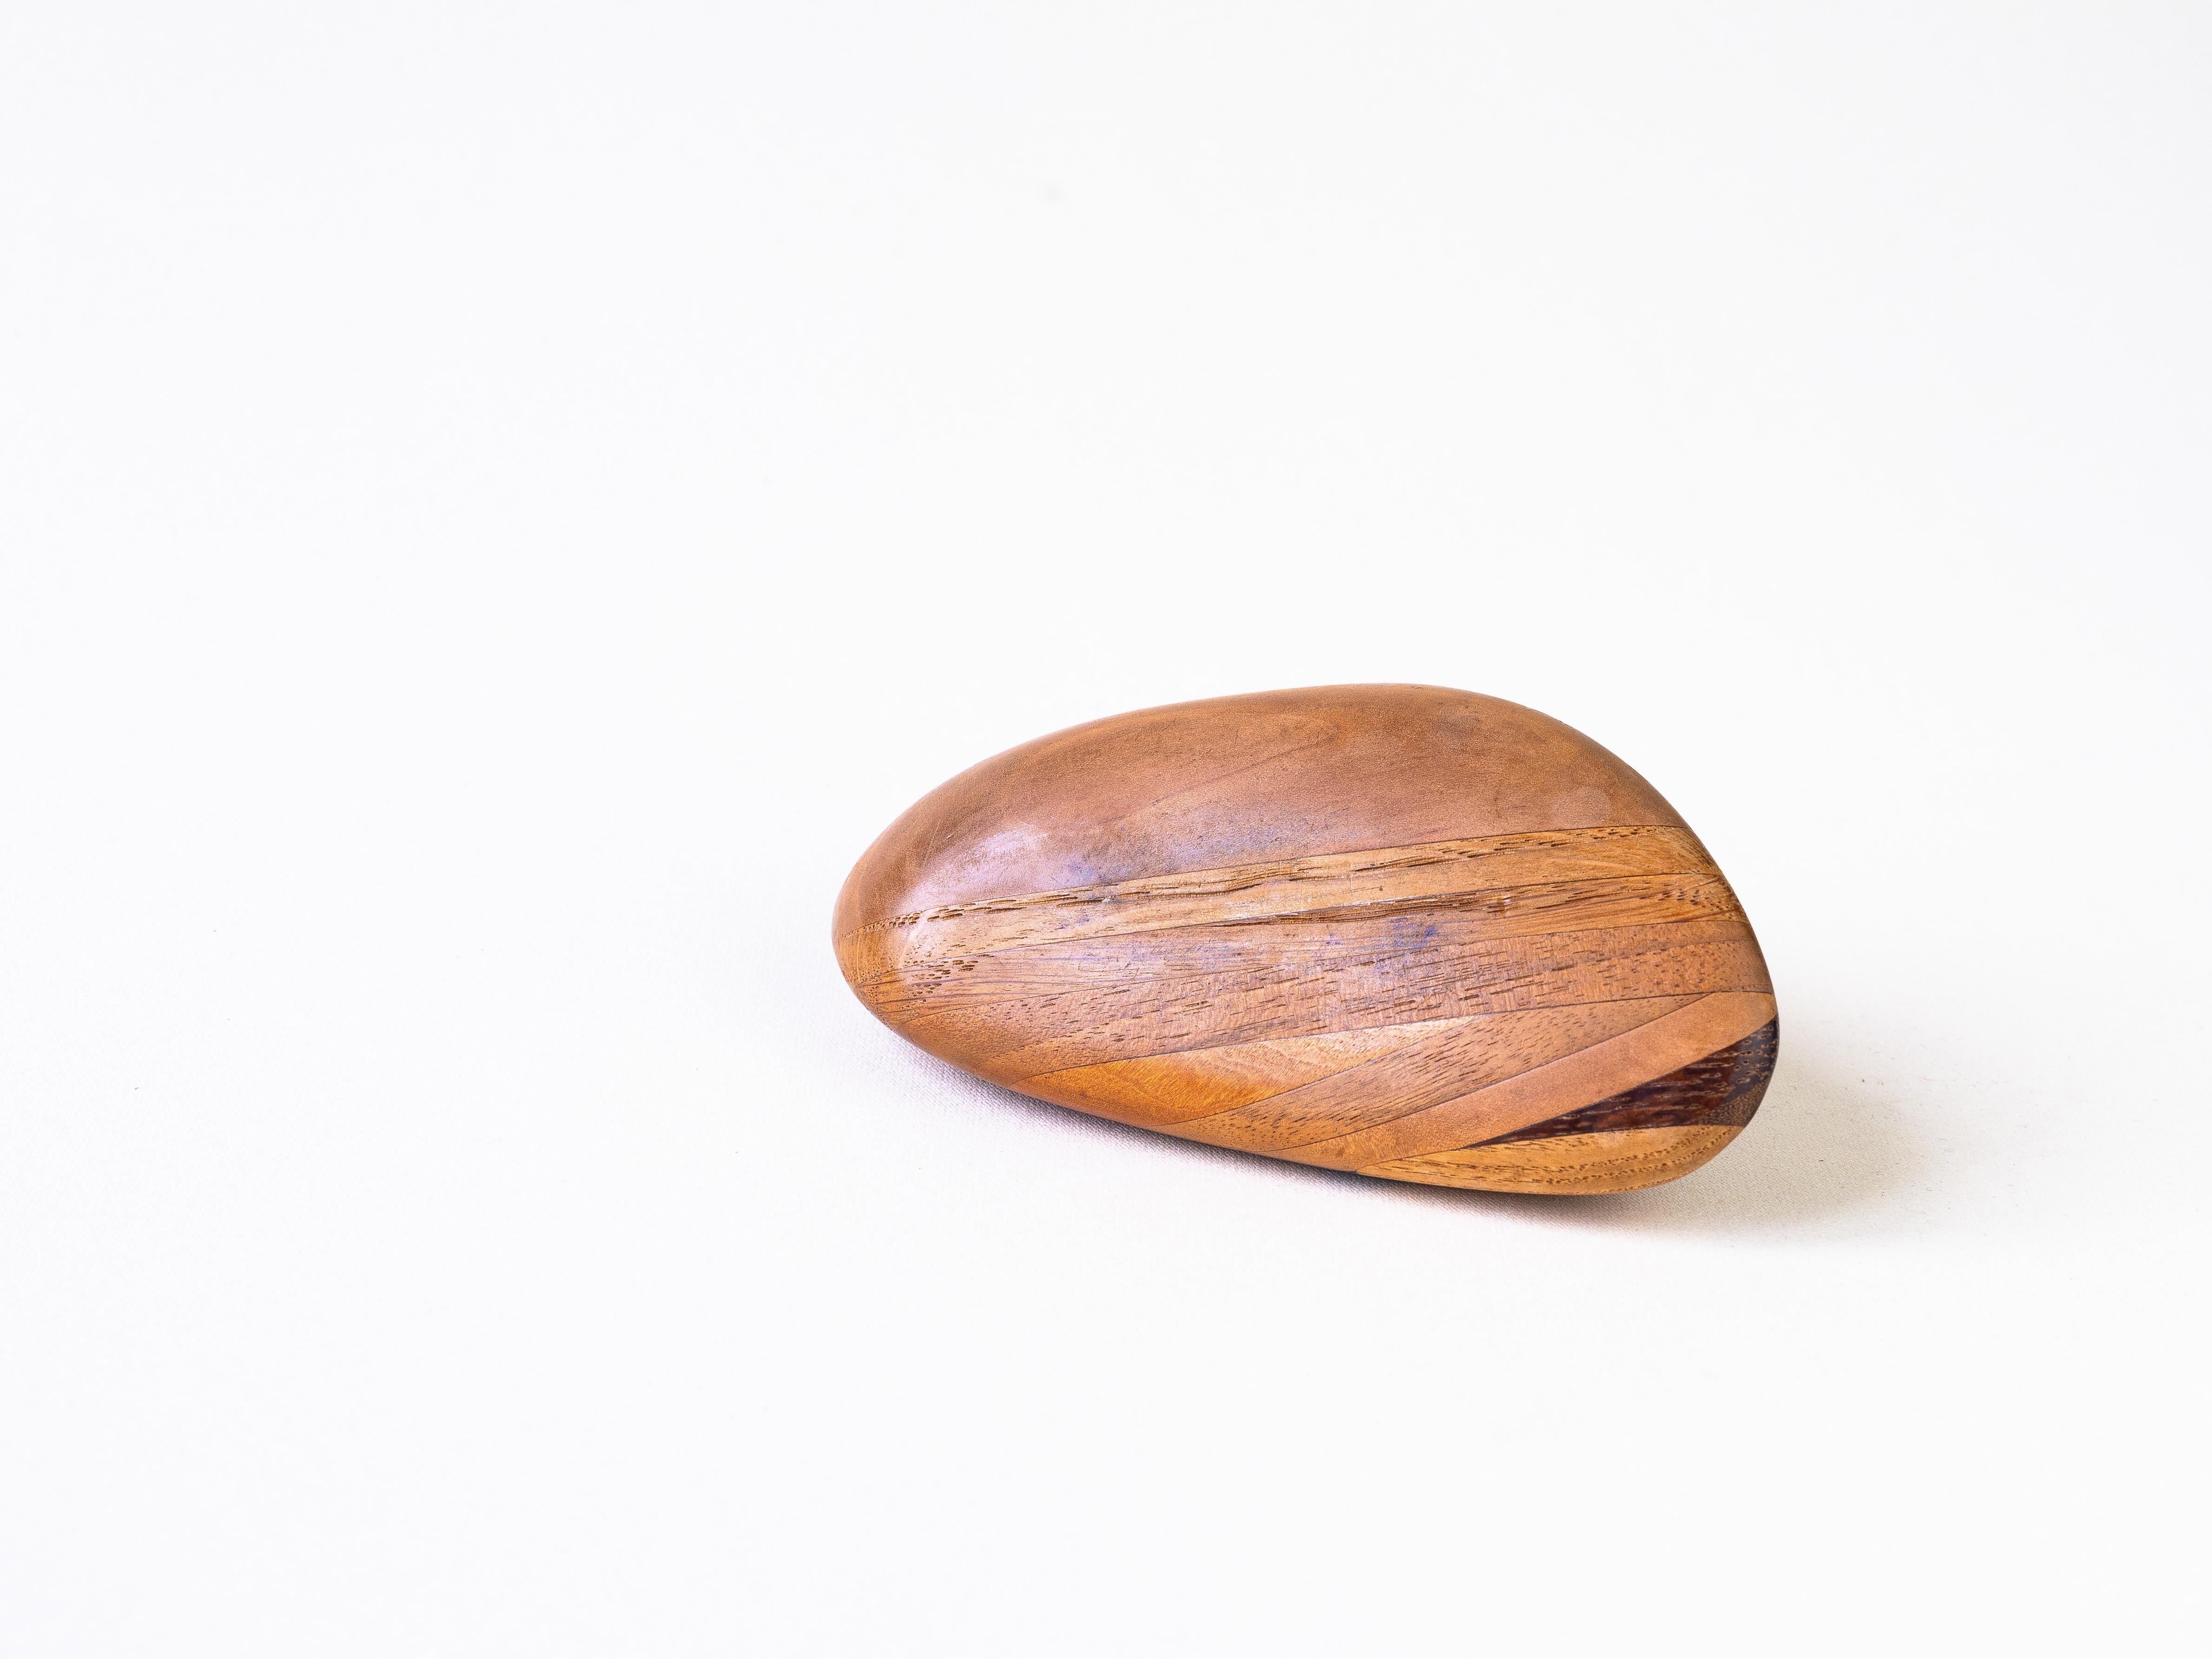 Sculpture Wooden Pebble, 1970s Desk Accessory, Marquetry Paperweight For Sale 2